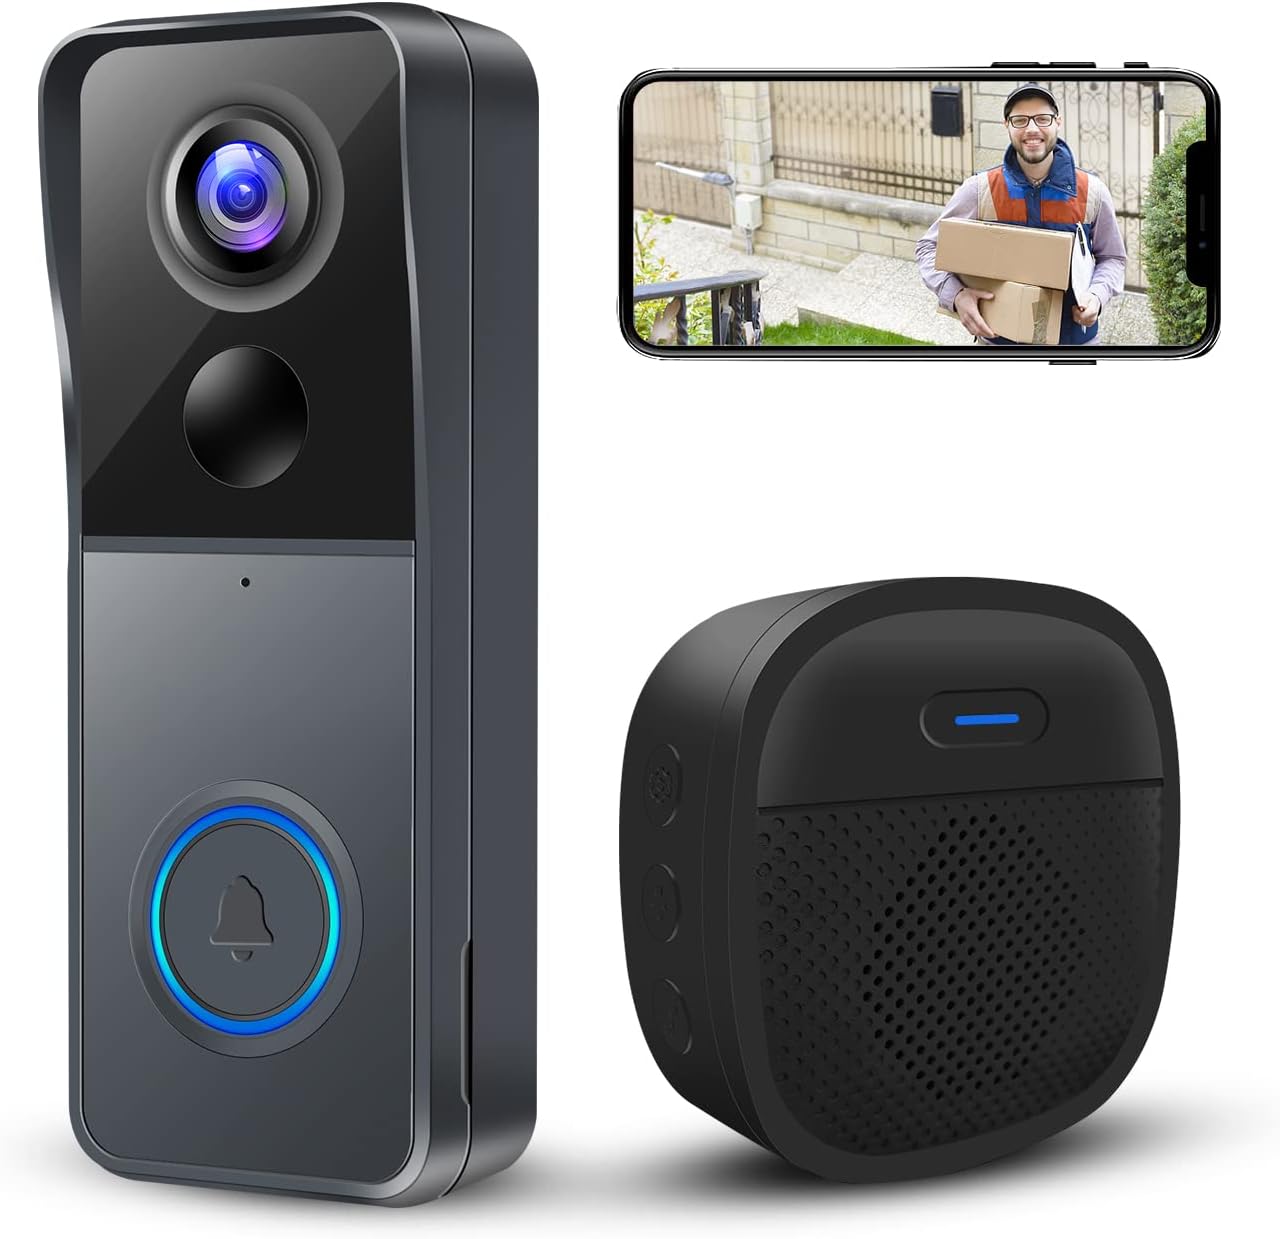 KAMEP Wireless Video Doorbell Camera with Chime, Smart Video Door Bells with Camera Battery Powered, Voice Changer, PIR Motion Detection, 1080P HD, 2-Way Audio, 2.4G WiFI, Night Vision, Support SD Card